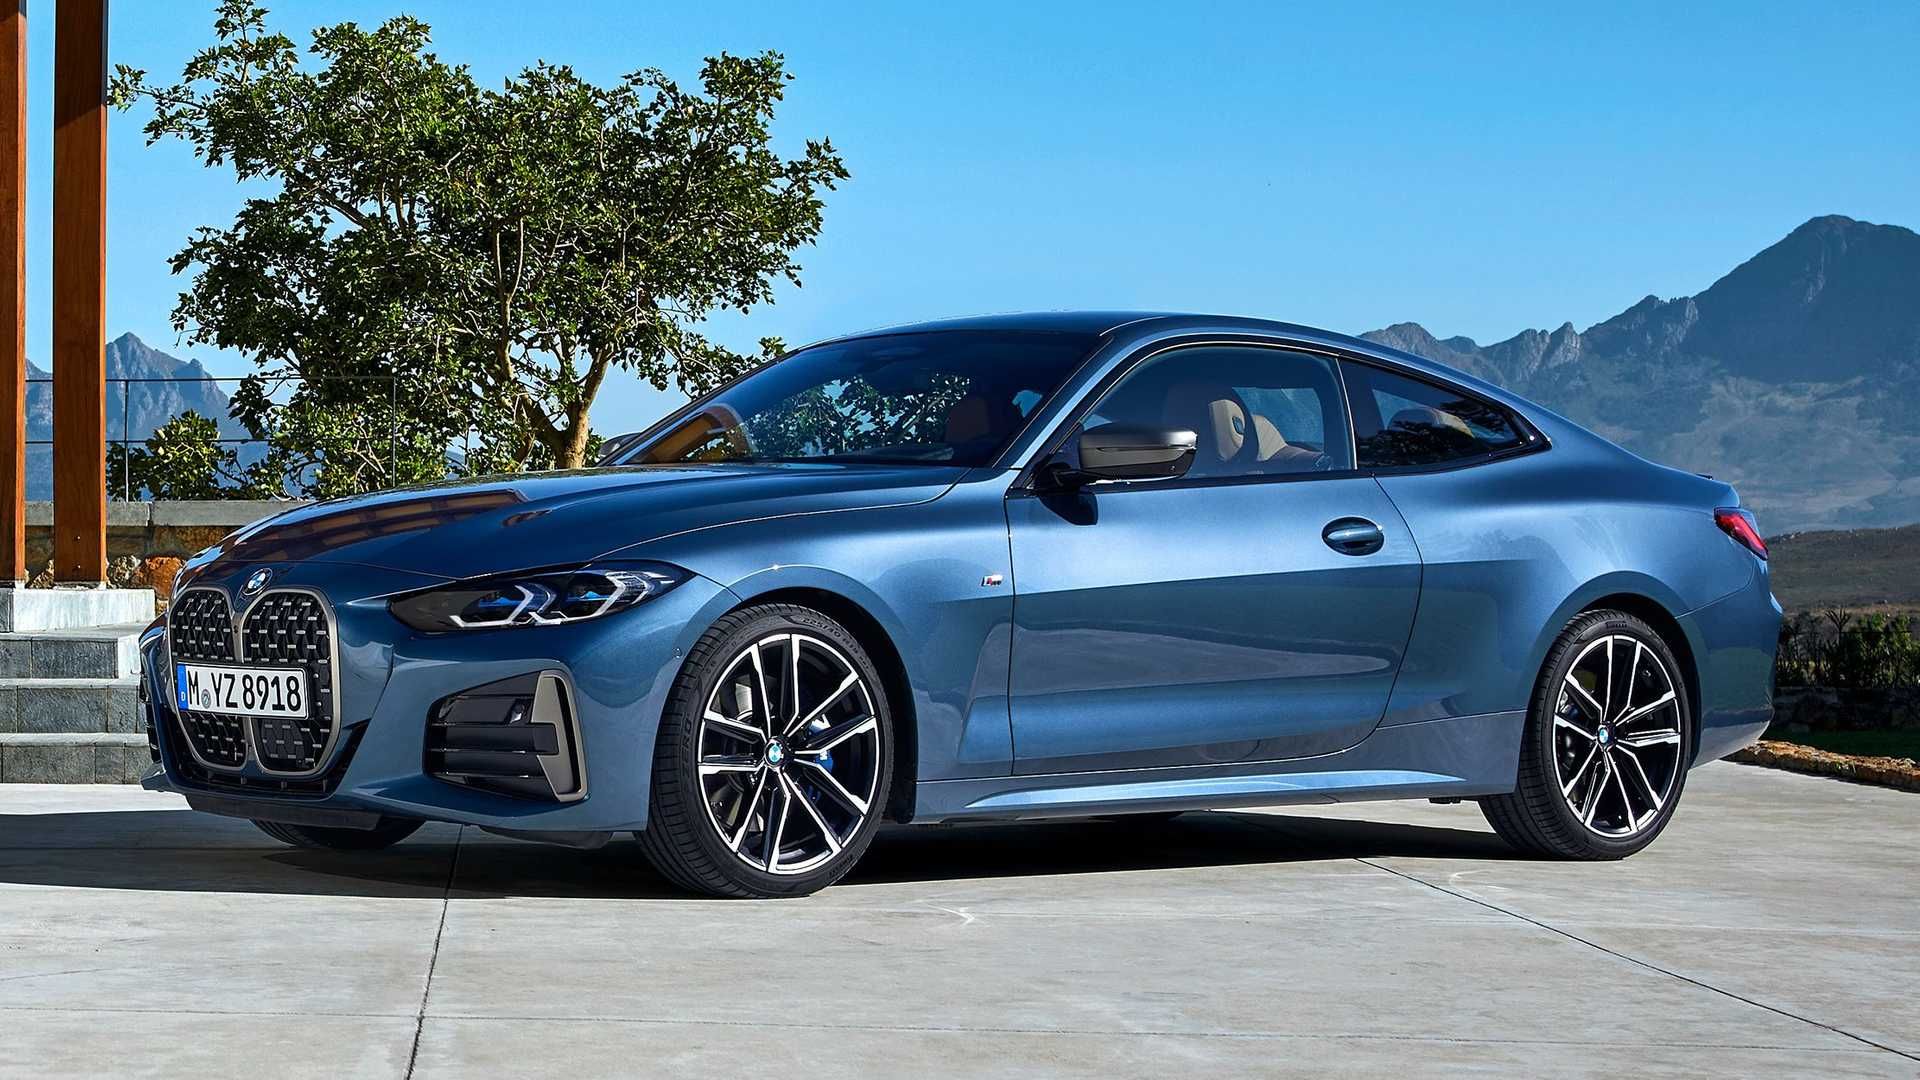 BMW 4 Series Side View